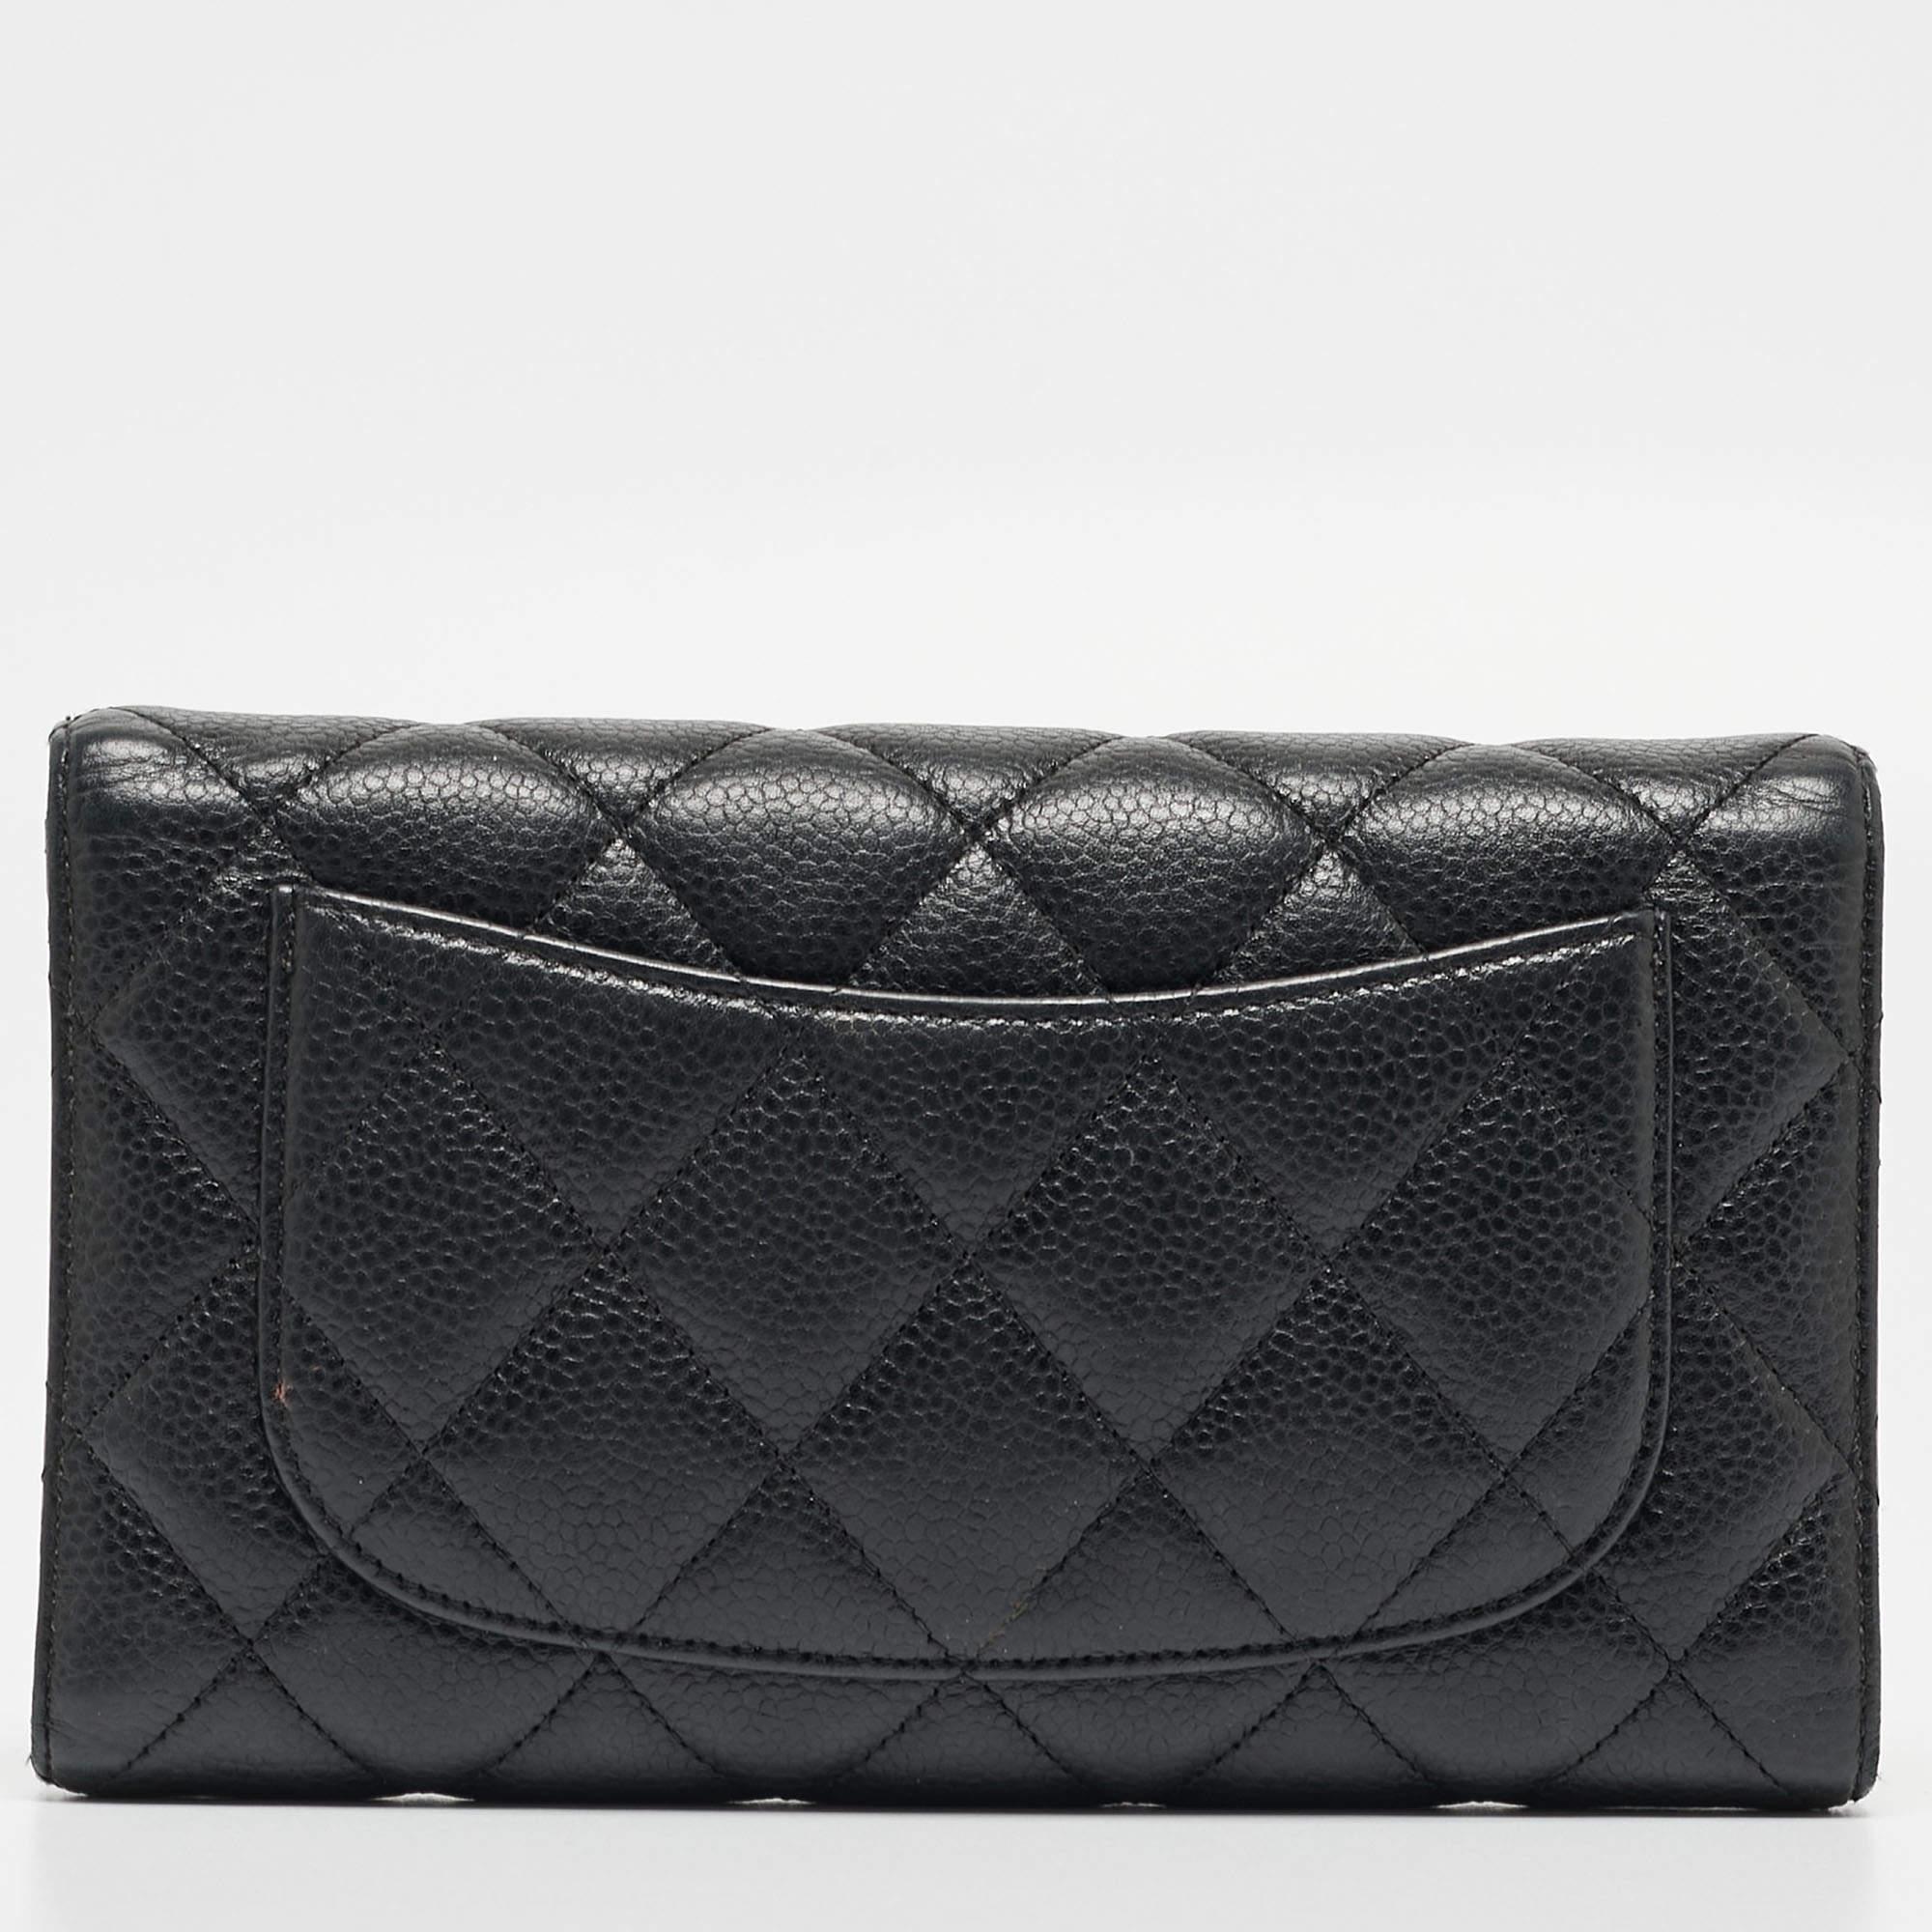 This Chanel wallet is designed for everyday use. Crafted from quilted leather, the wallet opens to reveal slip compartments and multiple card slots, for you to neatly arrange your cash and cards. This stylish piece is complete with the famous